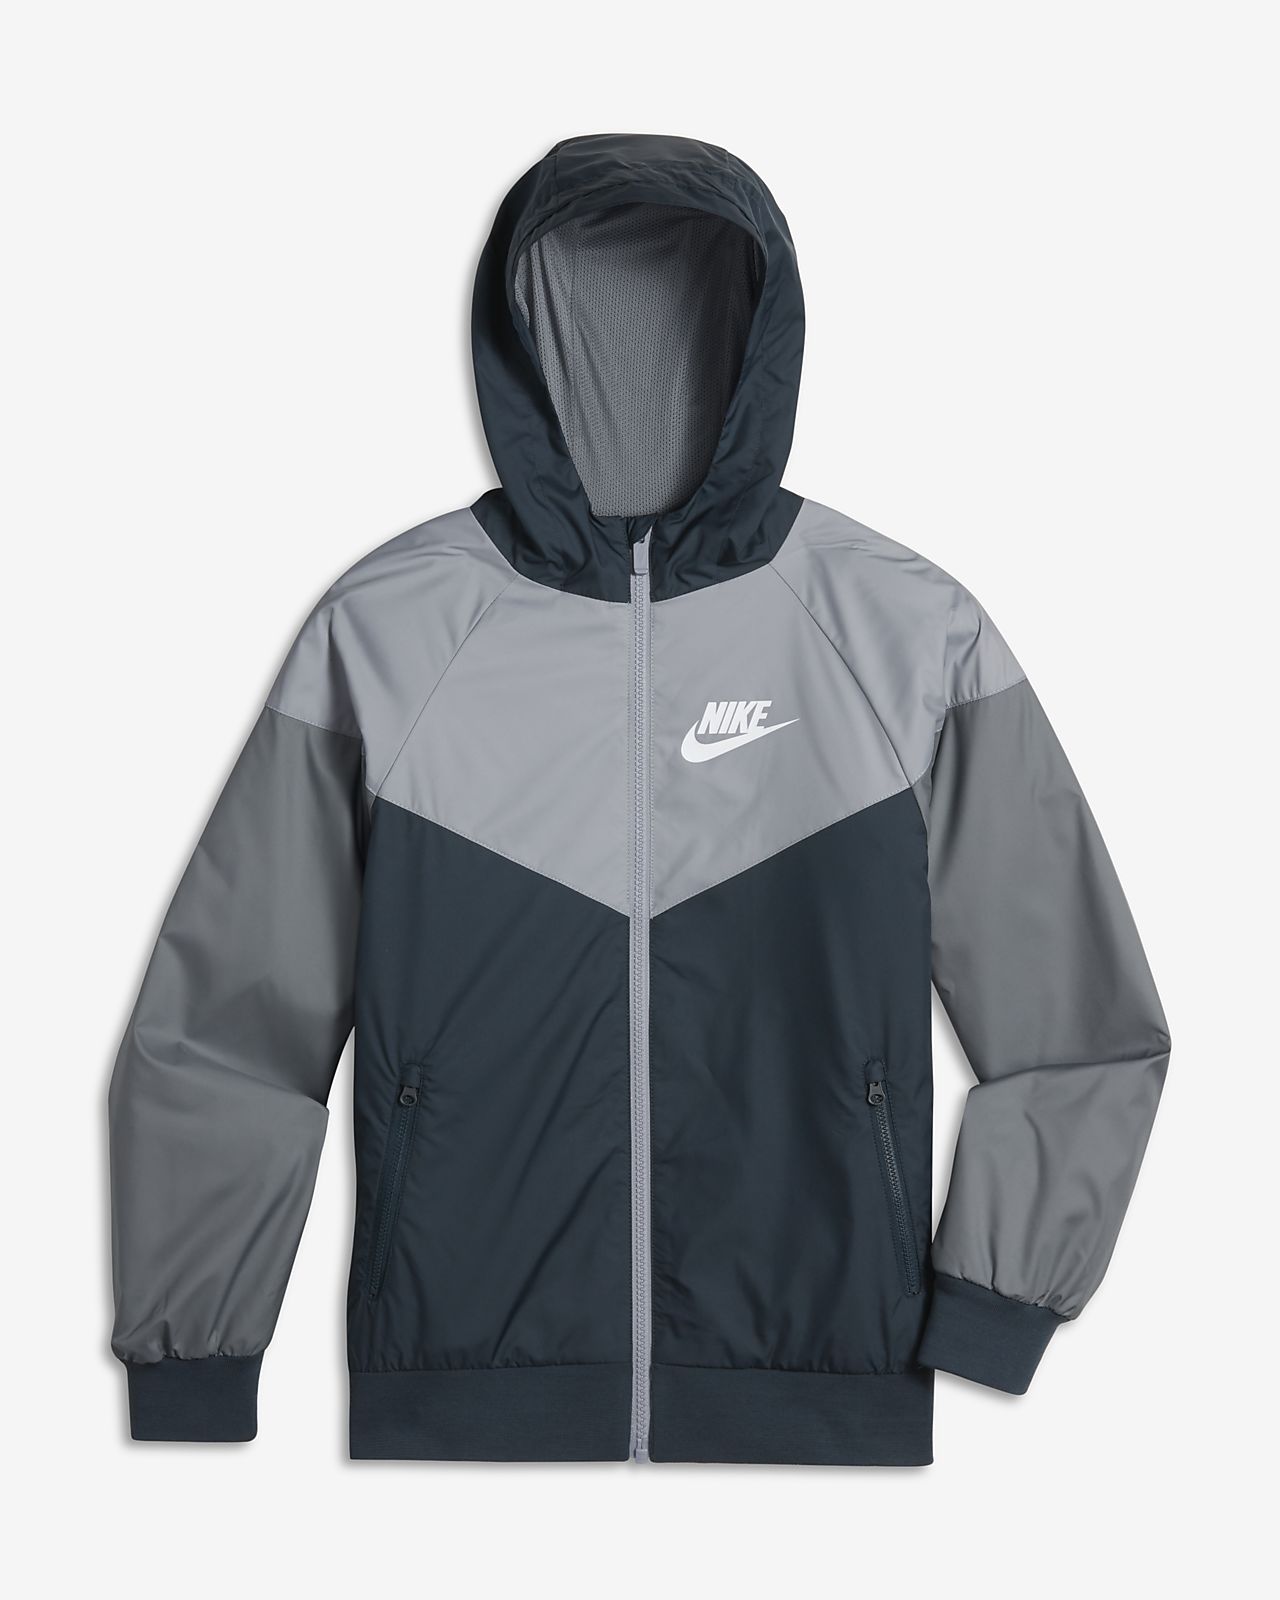 Acquista giacca nike windrunner - OFF74% sconti